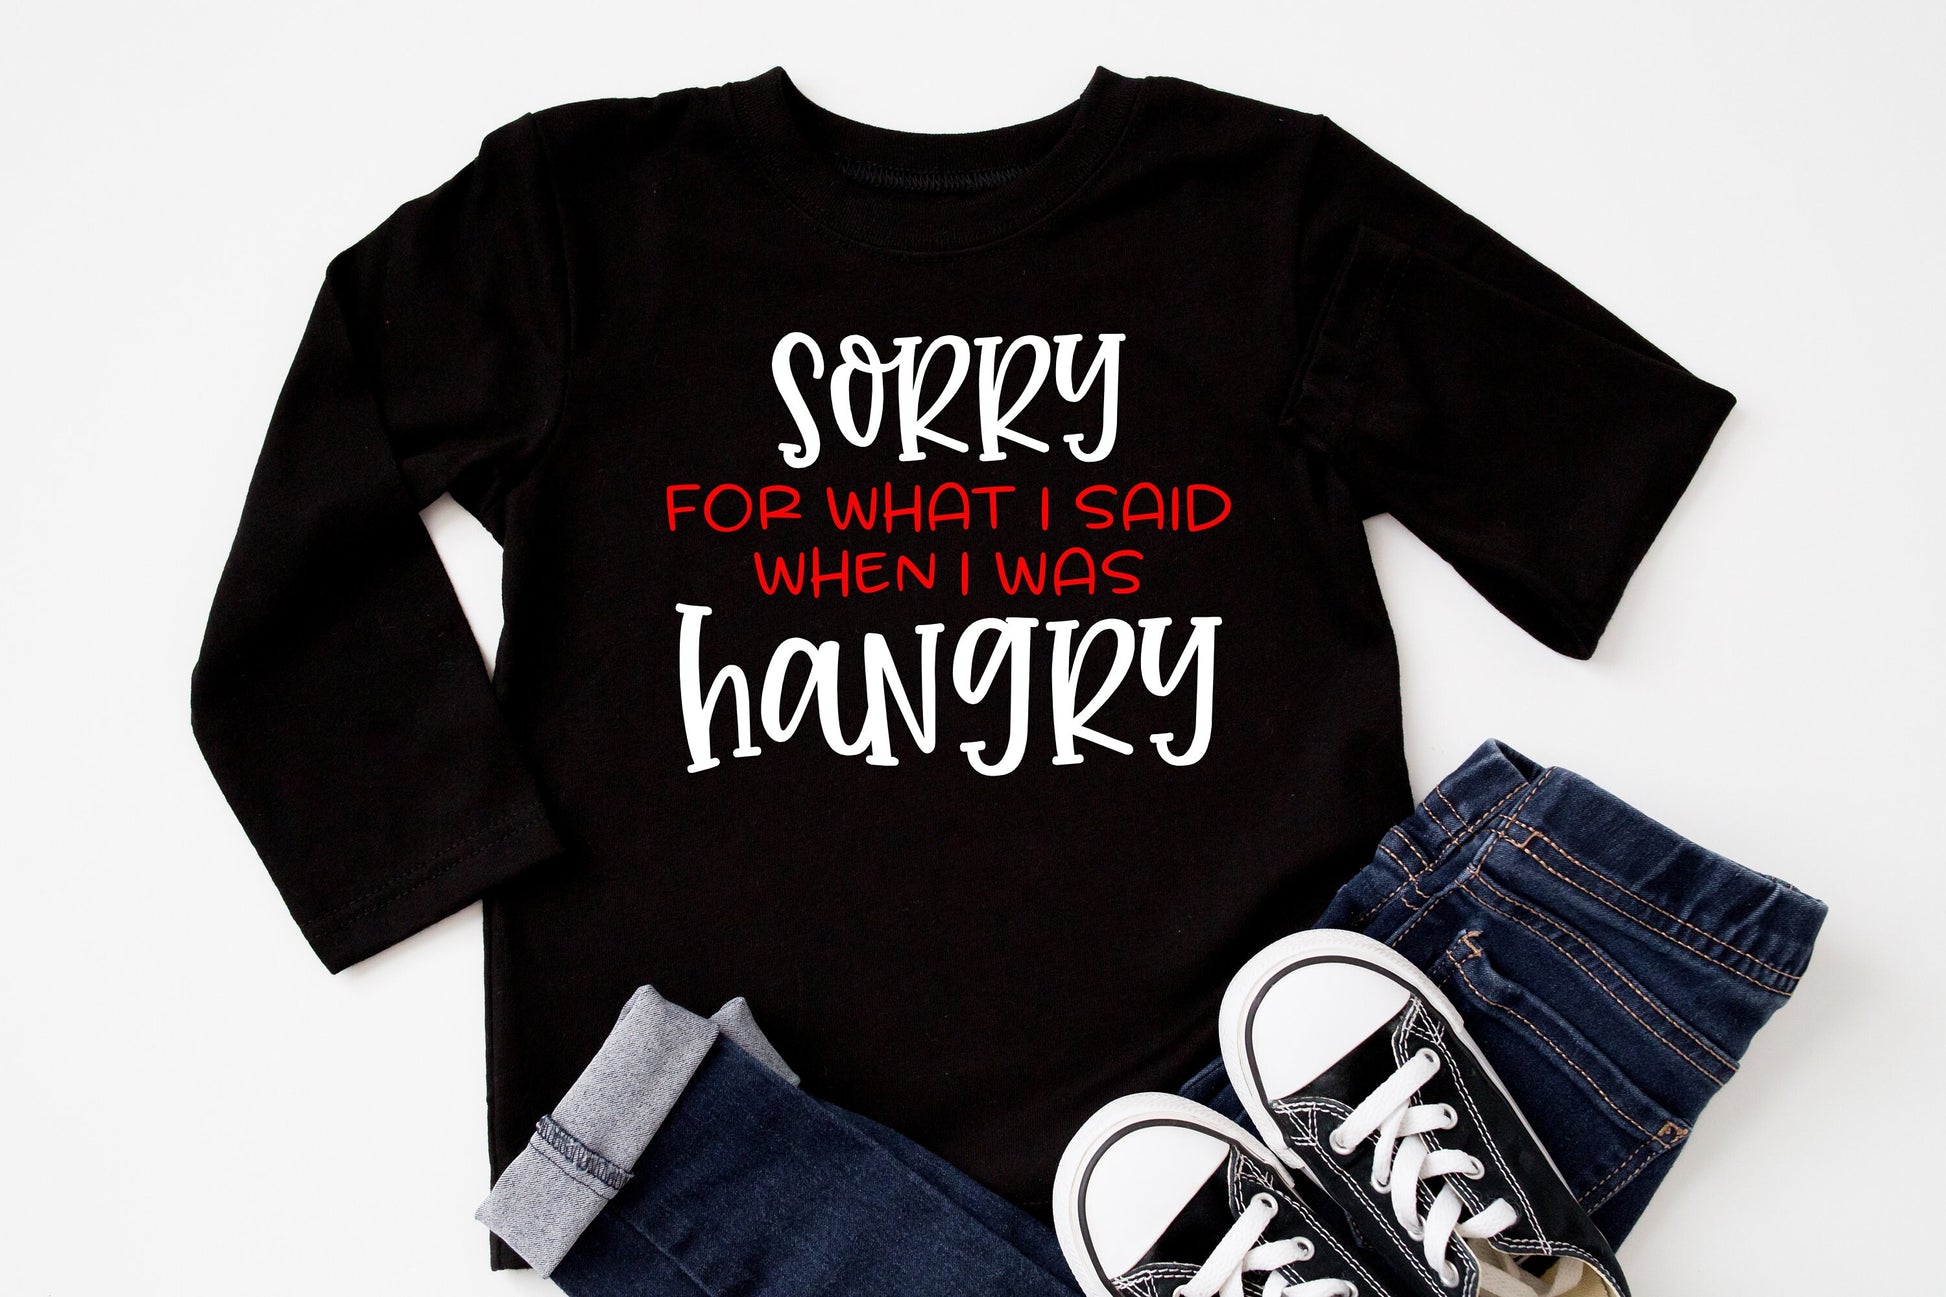 Sorry for What I Said When I Was Hangry Toddler or Youth Shirt - Cute Toddler Shirt - Hangry Kids Shirt - Funny Kids Shirt - Hangry Shirt